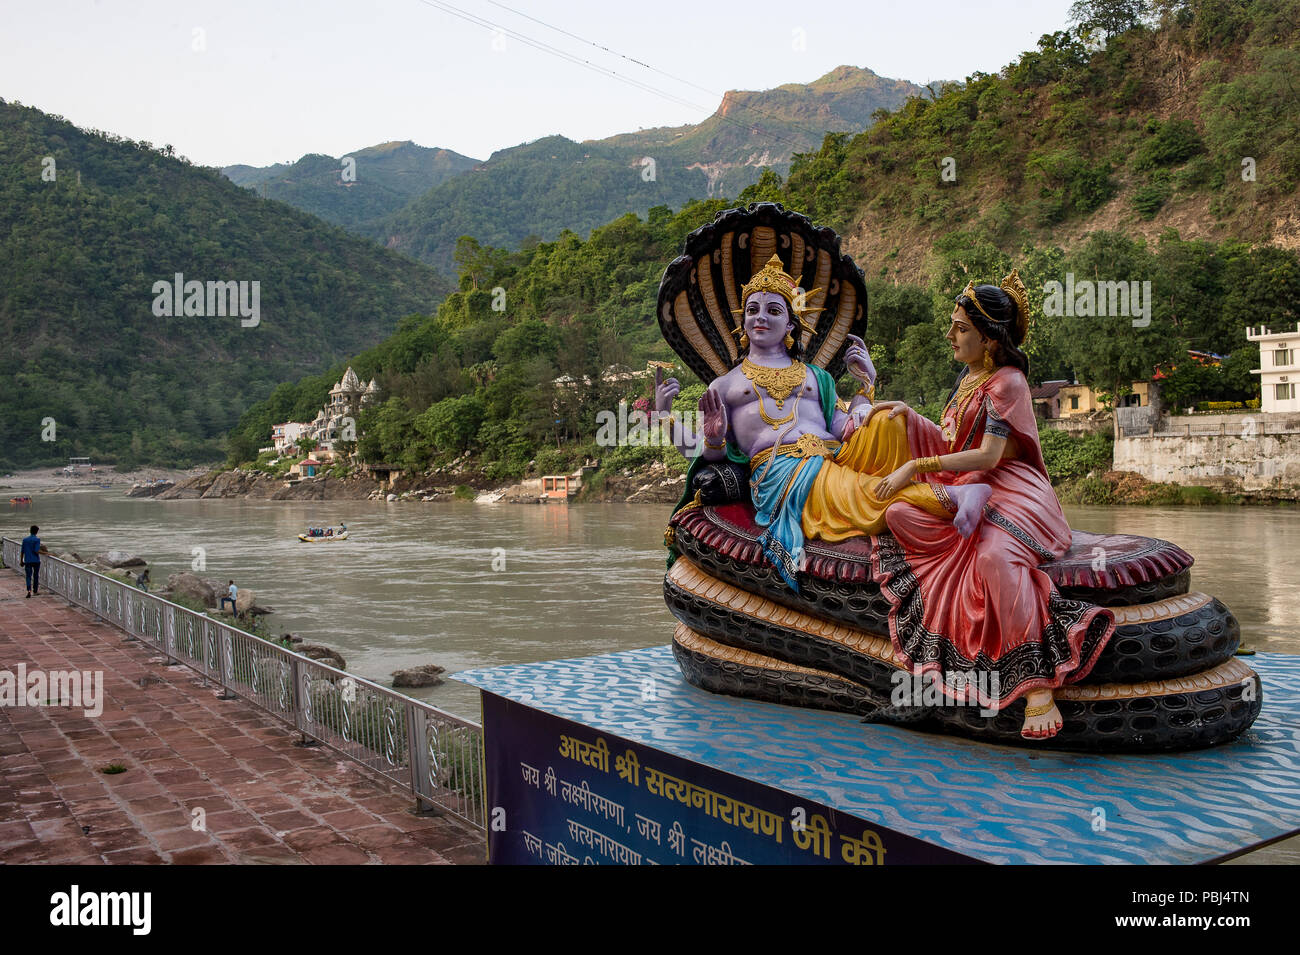 Religious statues on the Ganges river banks, Rishikesh, India Stock Photo